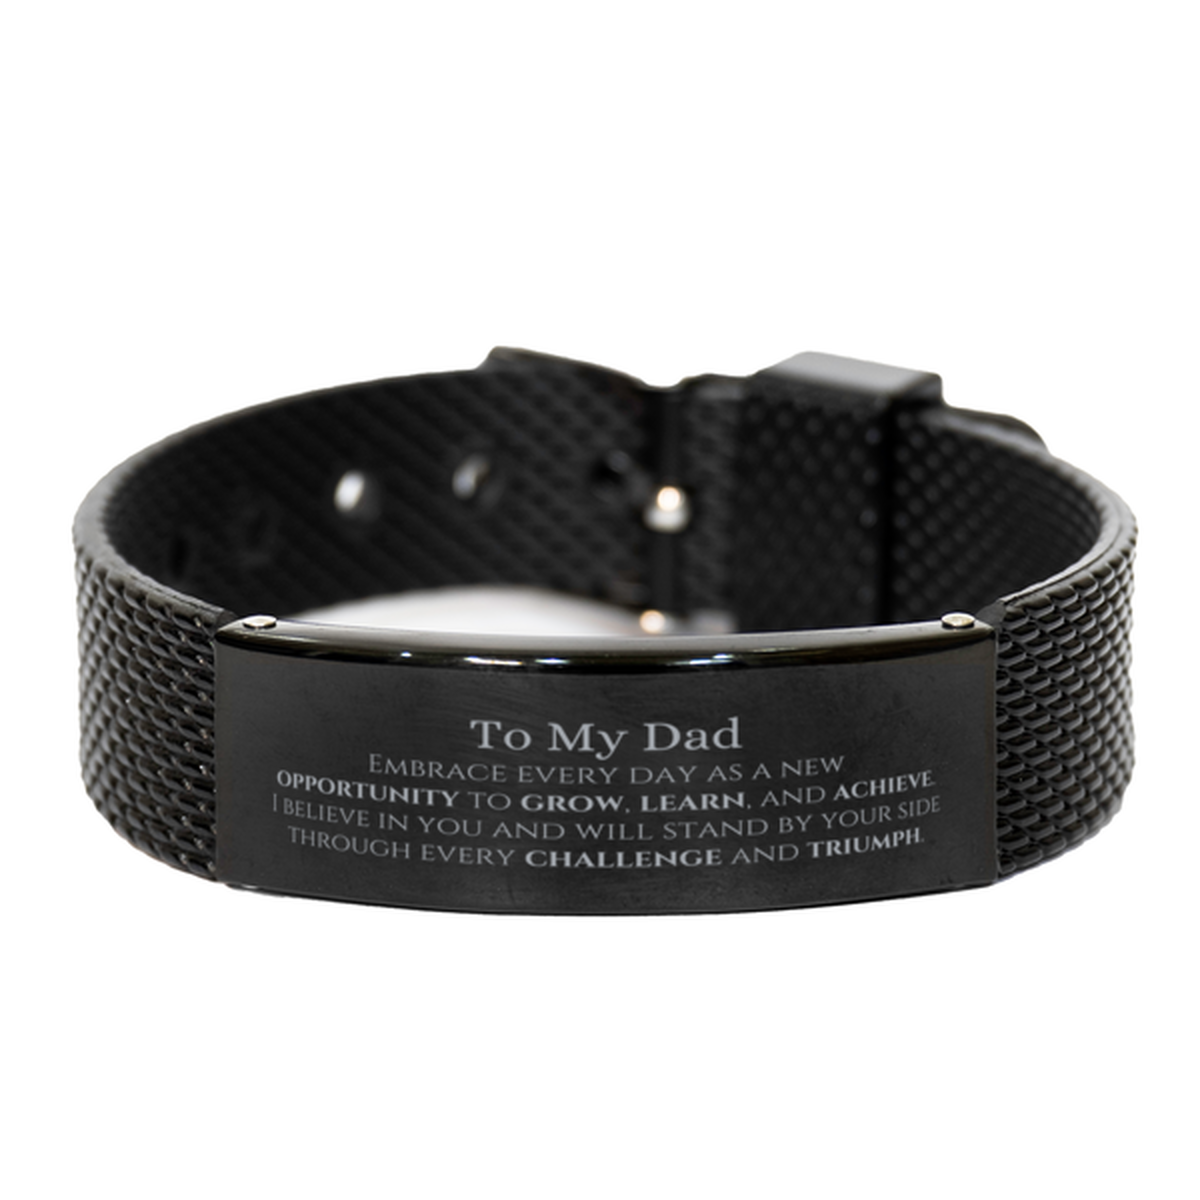 To My Dad Gifts, I believe in you and will stand by your side, Inspirational Black Shark Mesh Bracelet For Dad, Birthday Christmas Motivational Dad Gifts